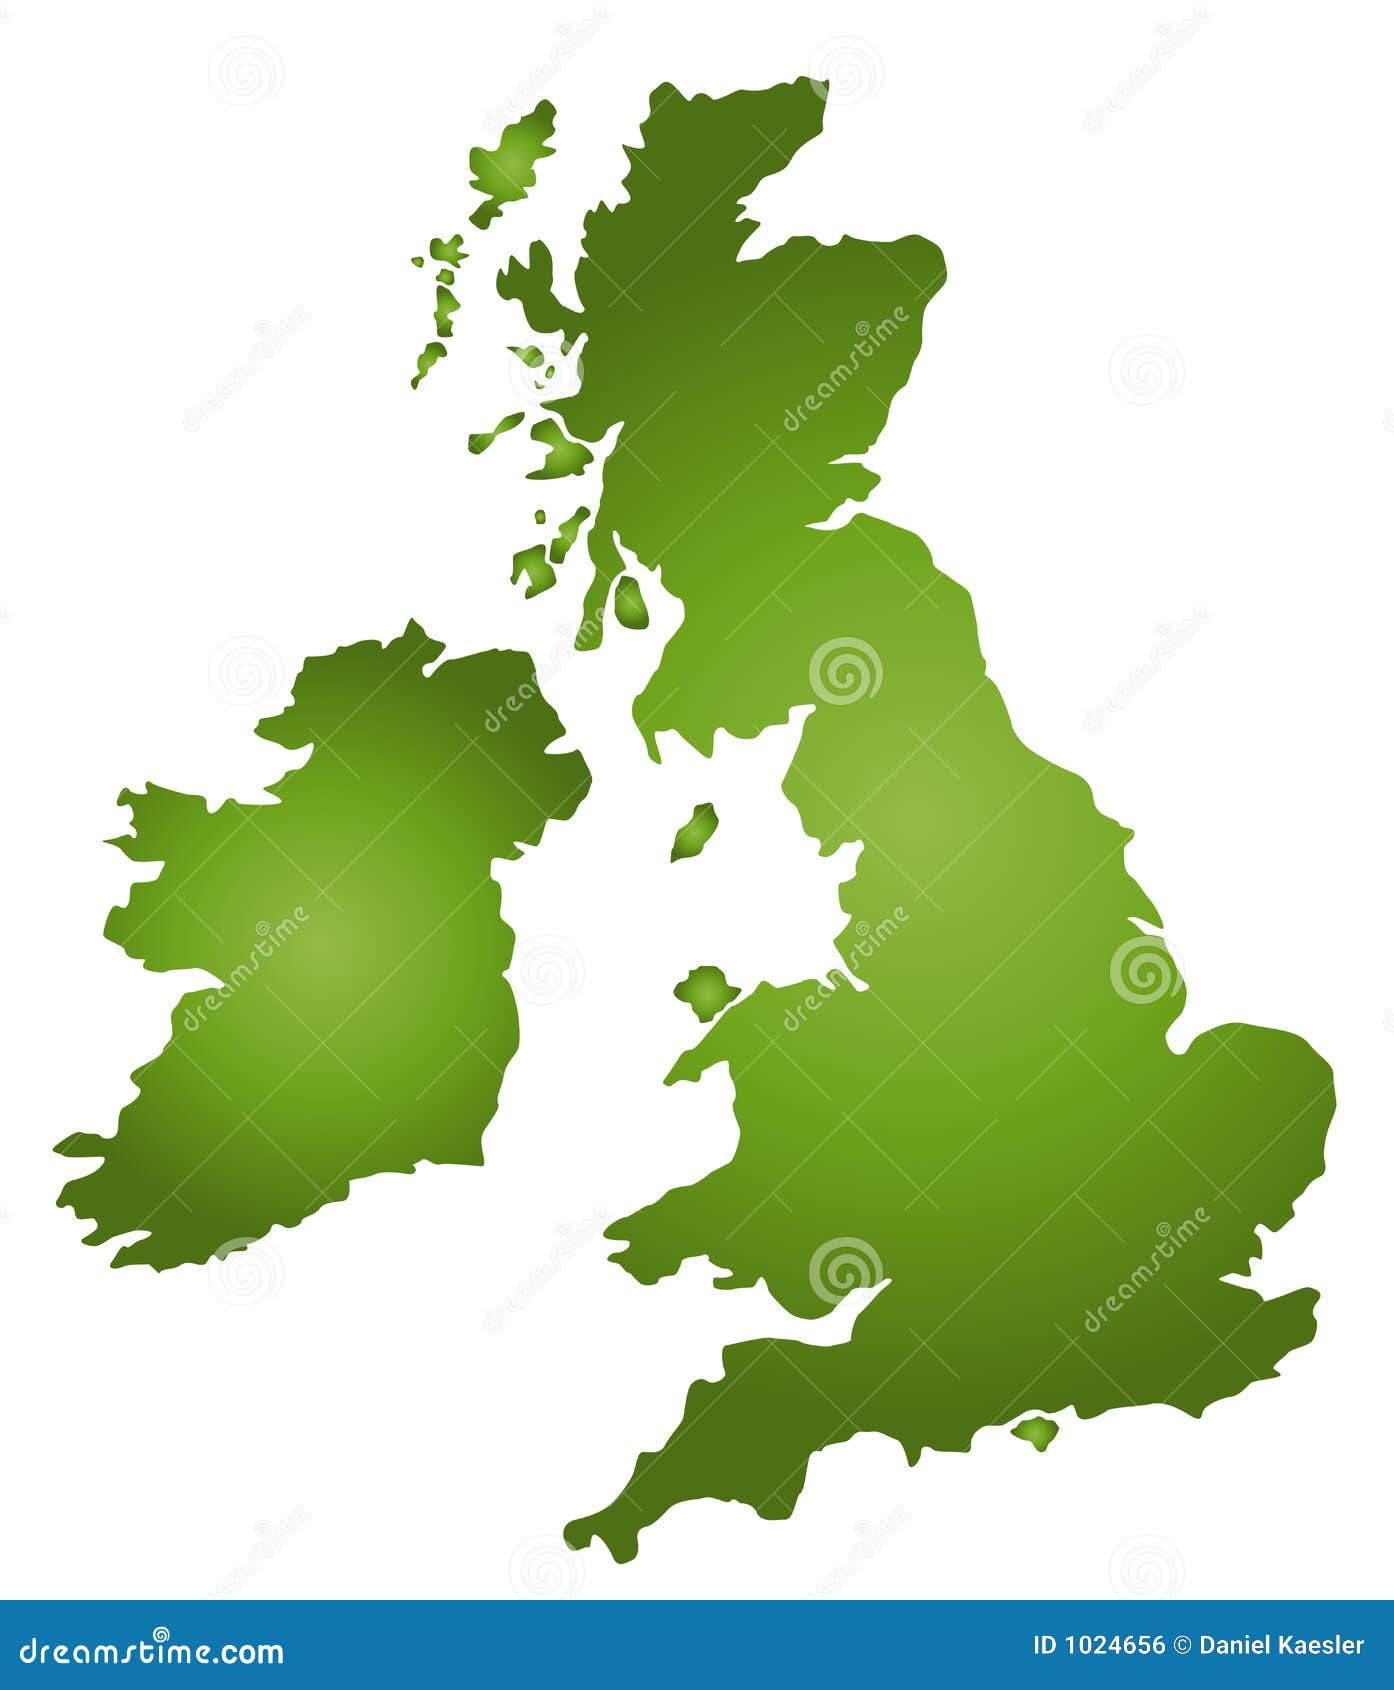 clipart map of wales - photo #14